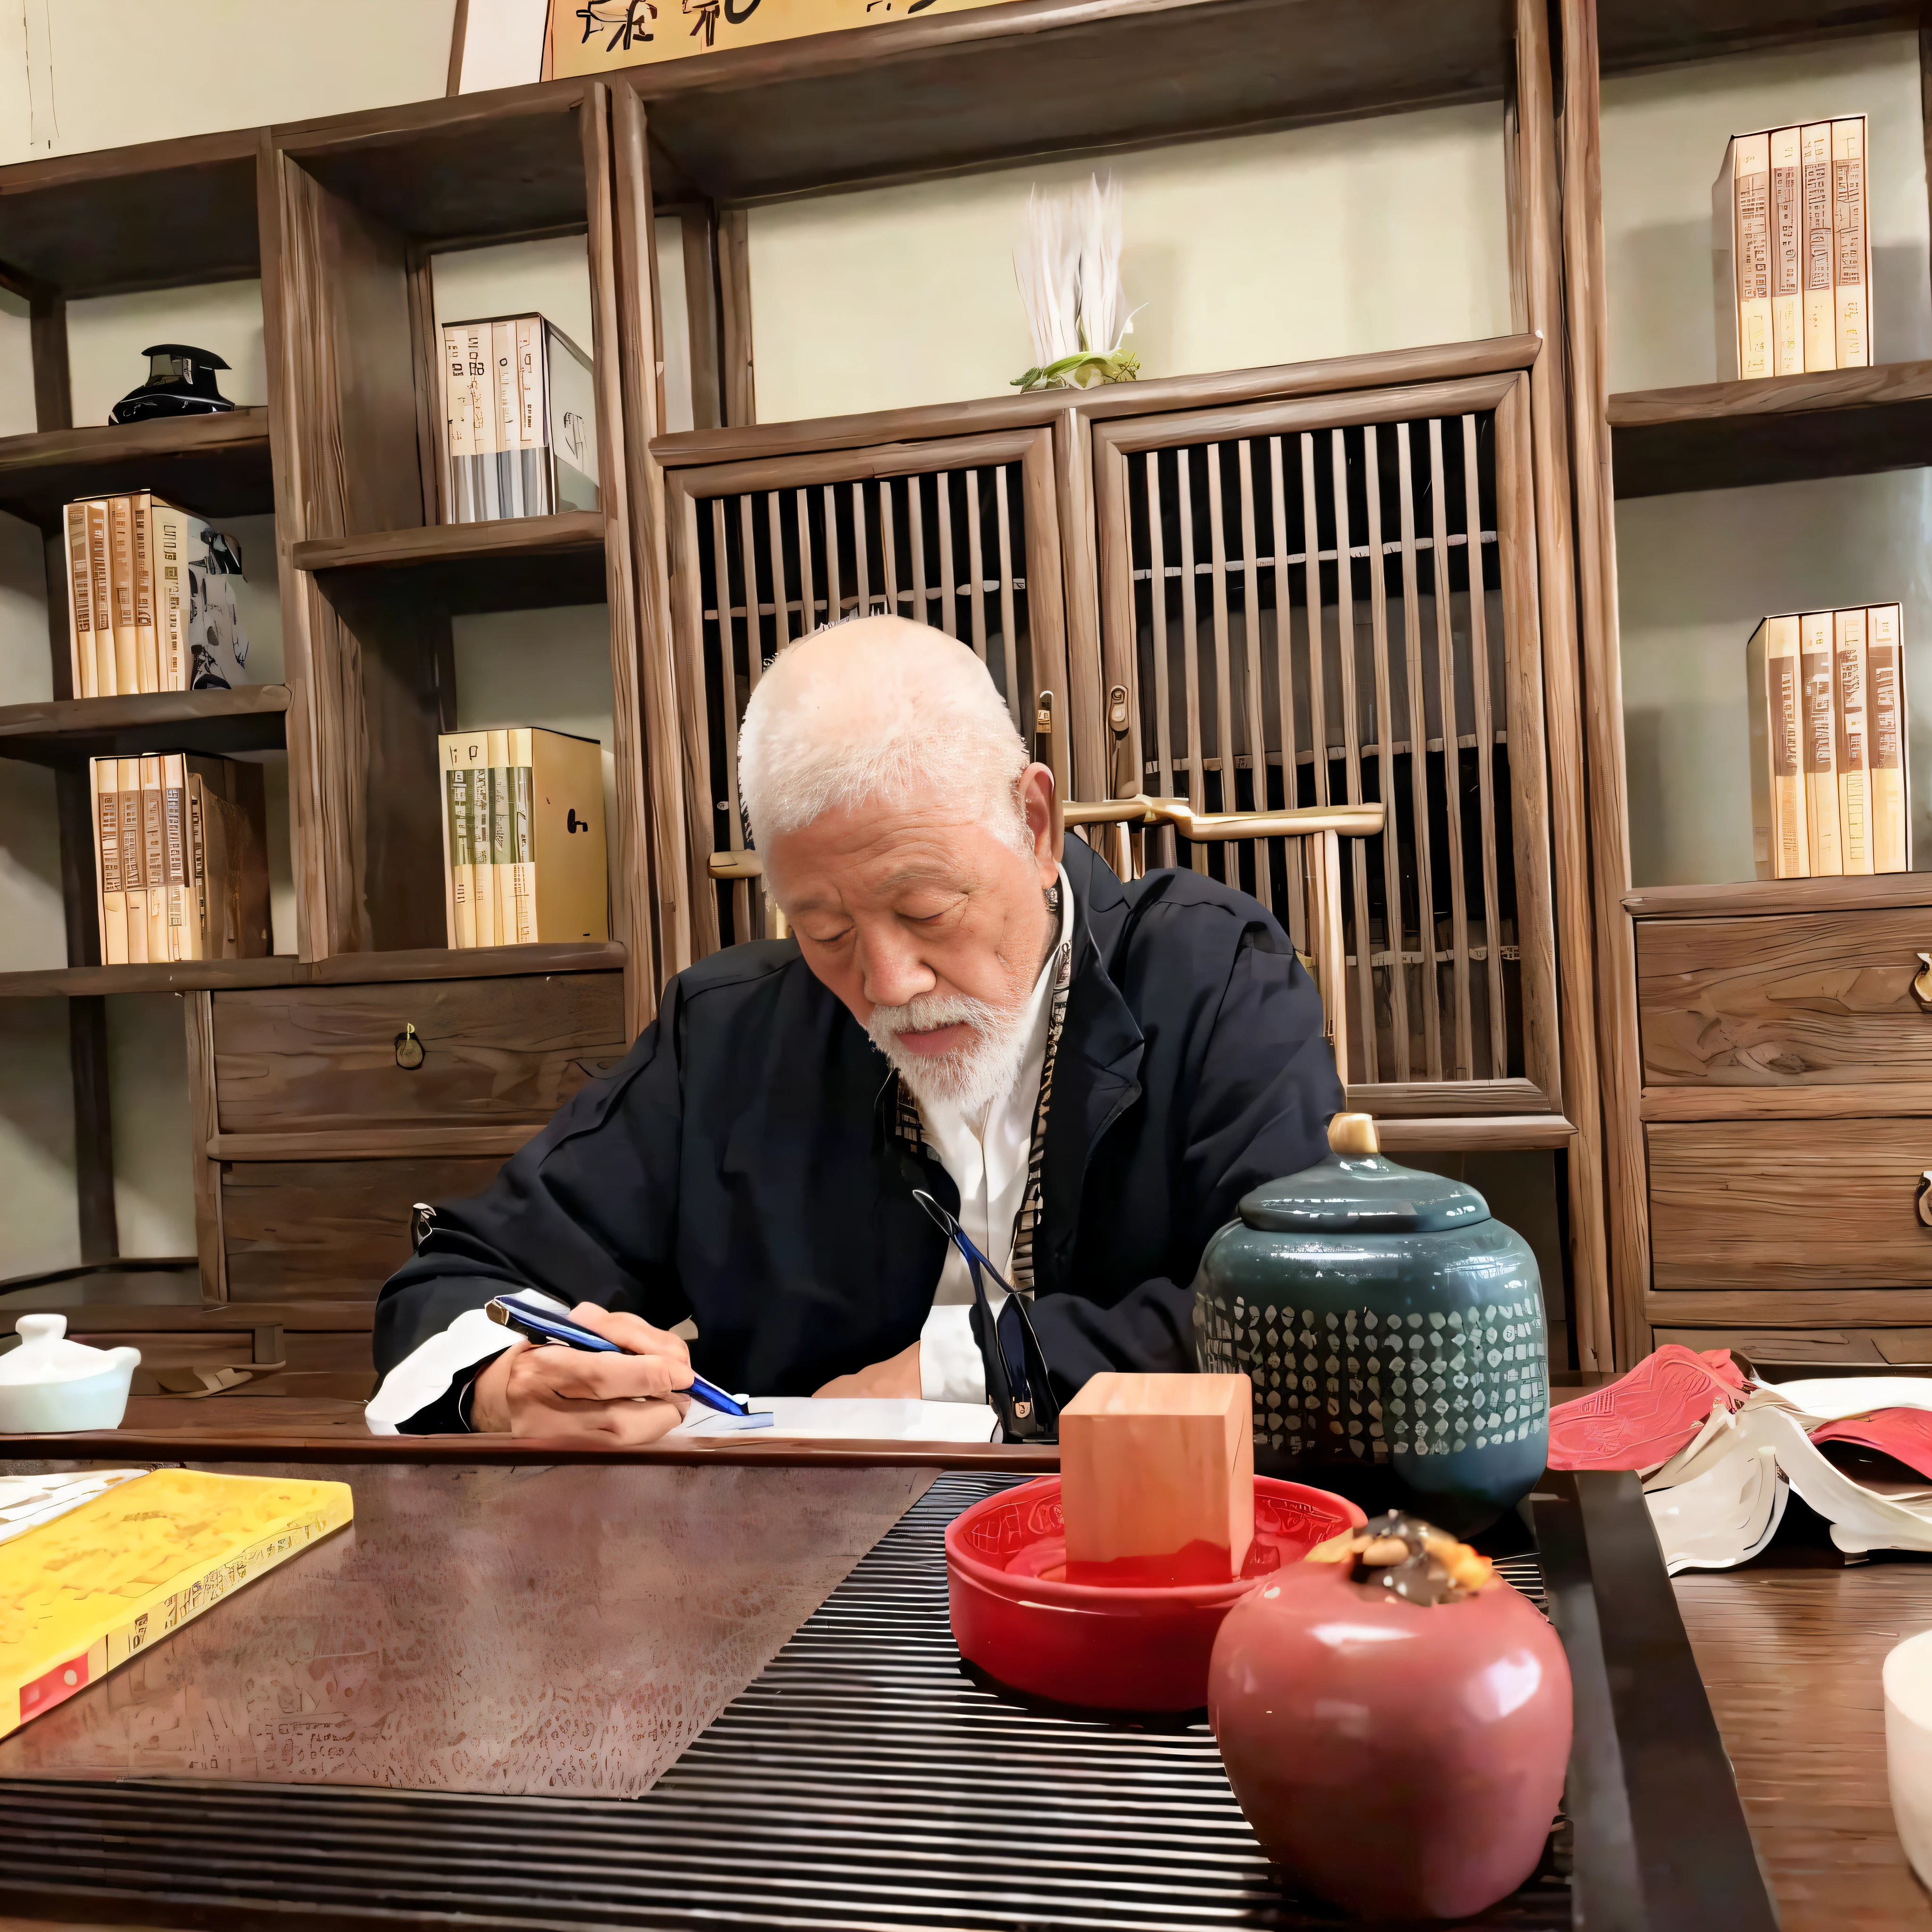 There was a man sitting at a table writing a book, inspired by Sesshū Tōyō, he is about 8 0 years old, riichi ueshiba, Chiba Yuda, inspired by Itō Jakuchū, inspired by Wu Daozi, inspired by Kanō Tanshin